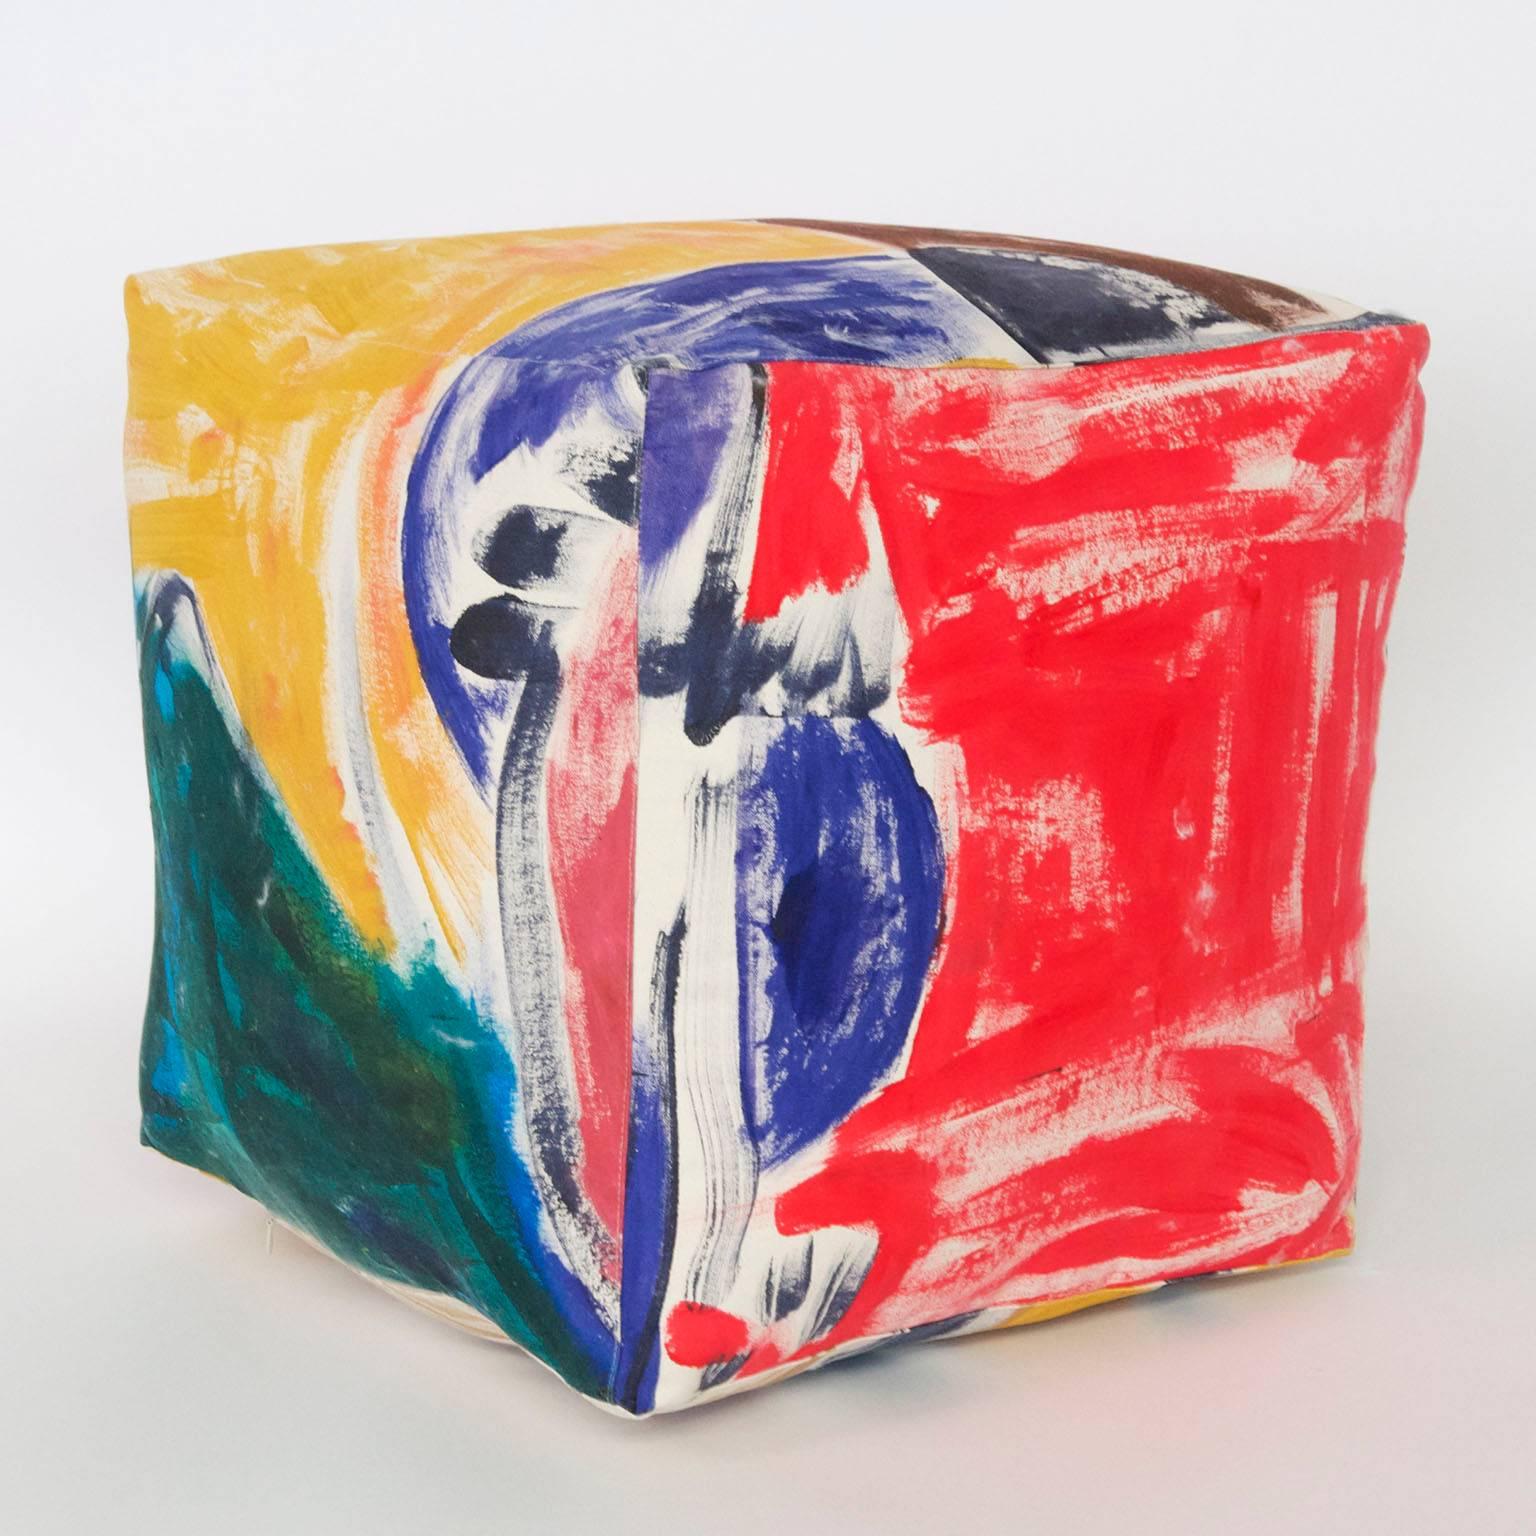 For Fort Makers, Naomi Clark paints vibrant abstract compositions on fabrics that are then made into useable objects. Each Hand-Painted Cotton Canvas Cube is a completely unique piece of art and can be customized according to  customers' color